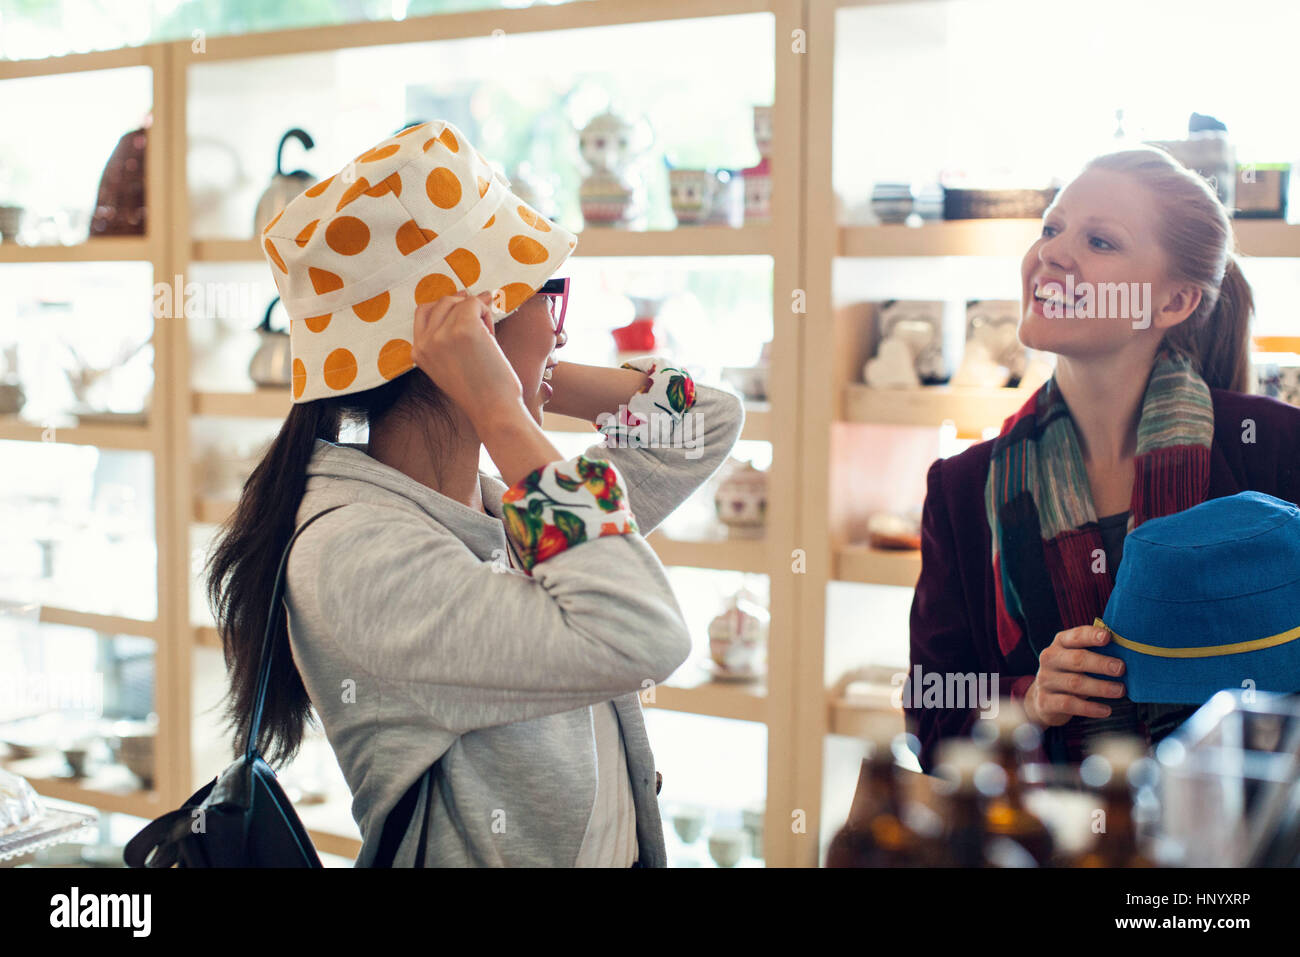 Woman trying on hat while shopping with friend Stock Photo